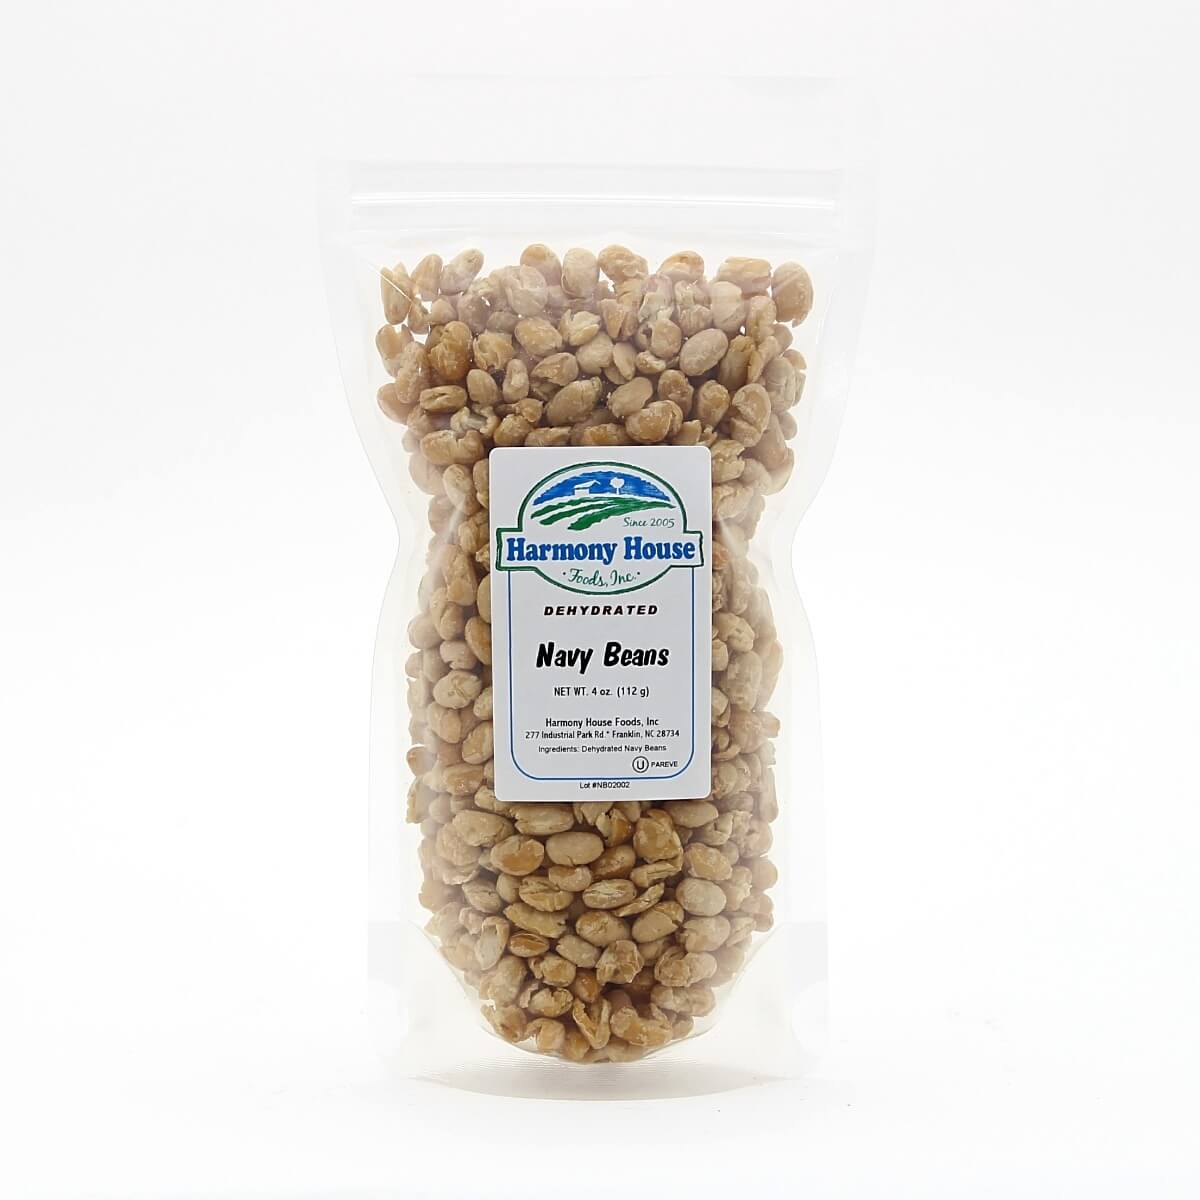 Navy beans in a bag on a white background.